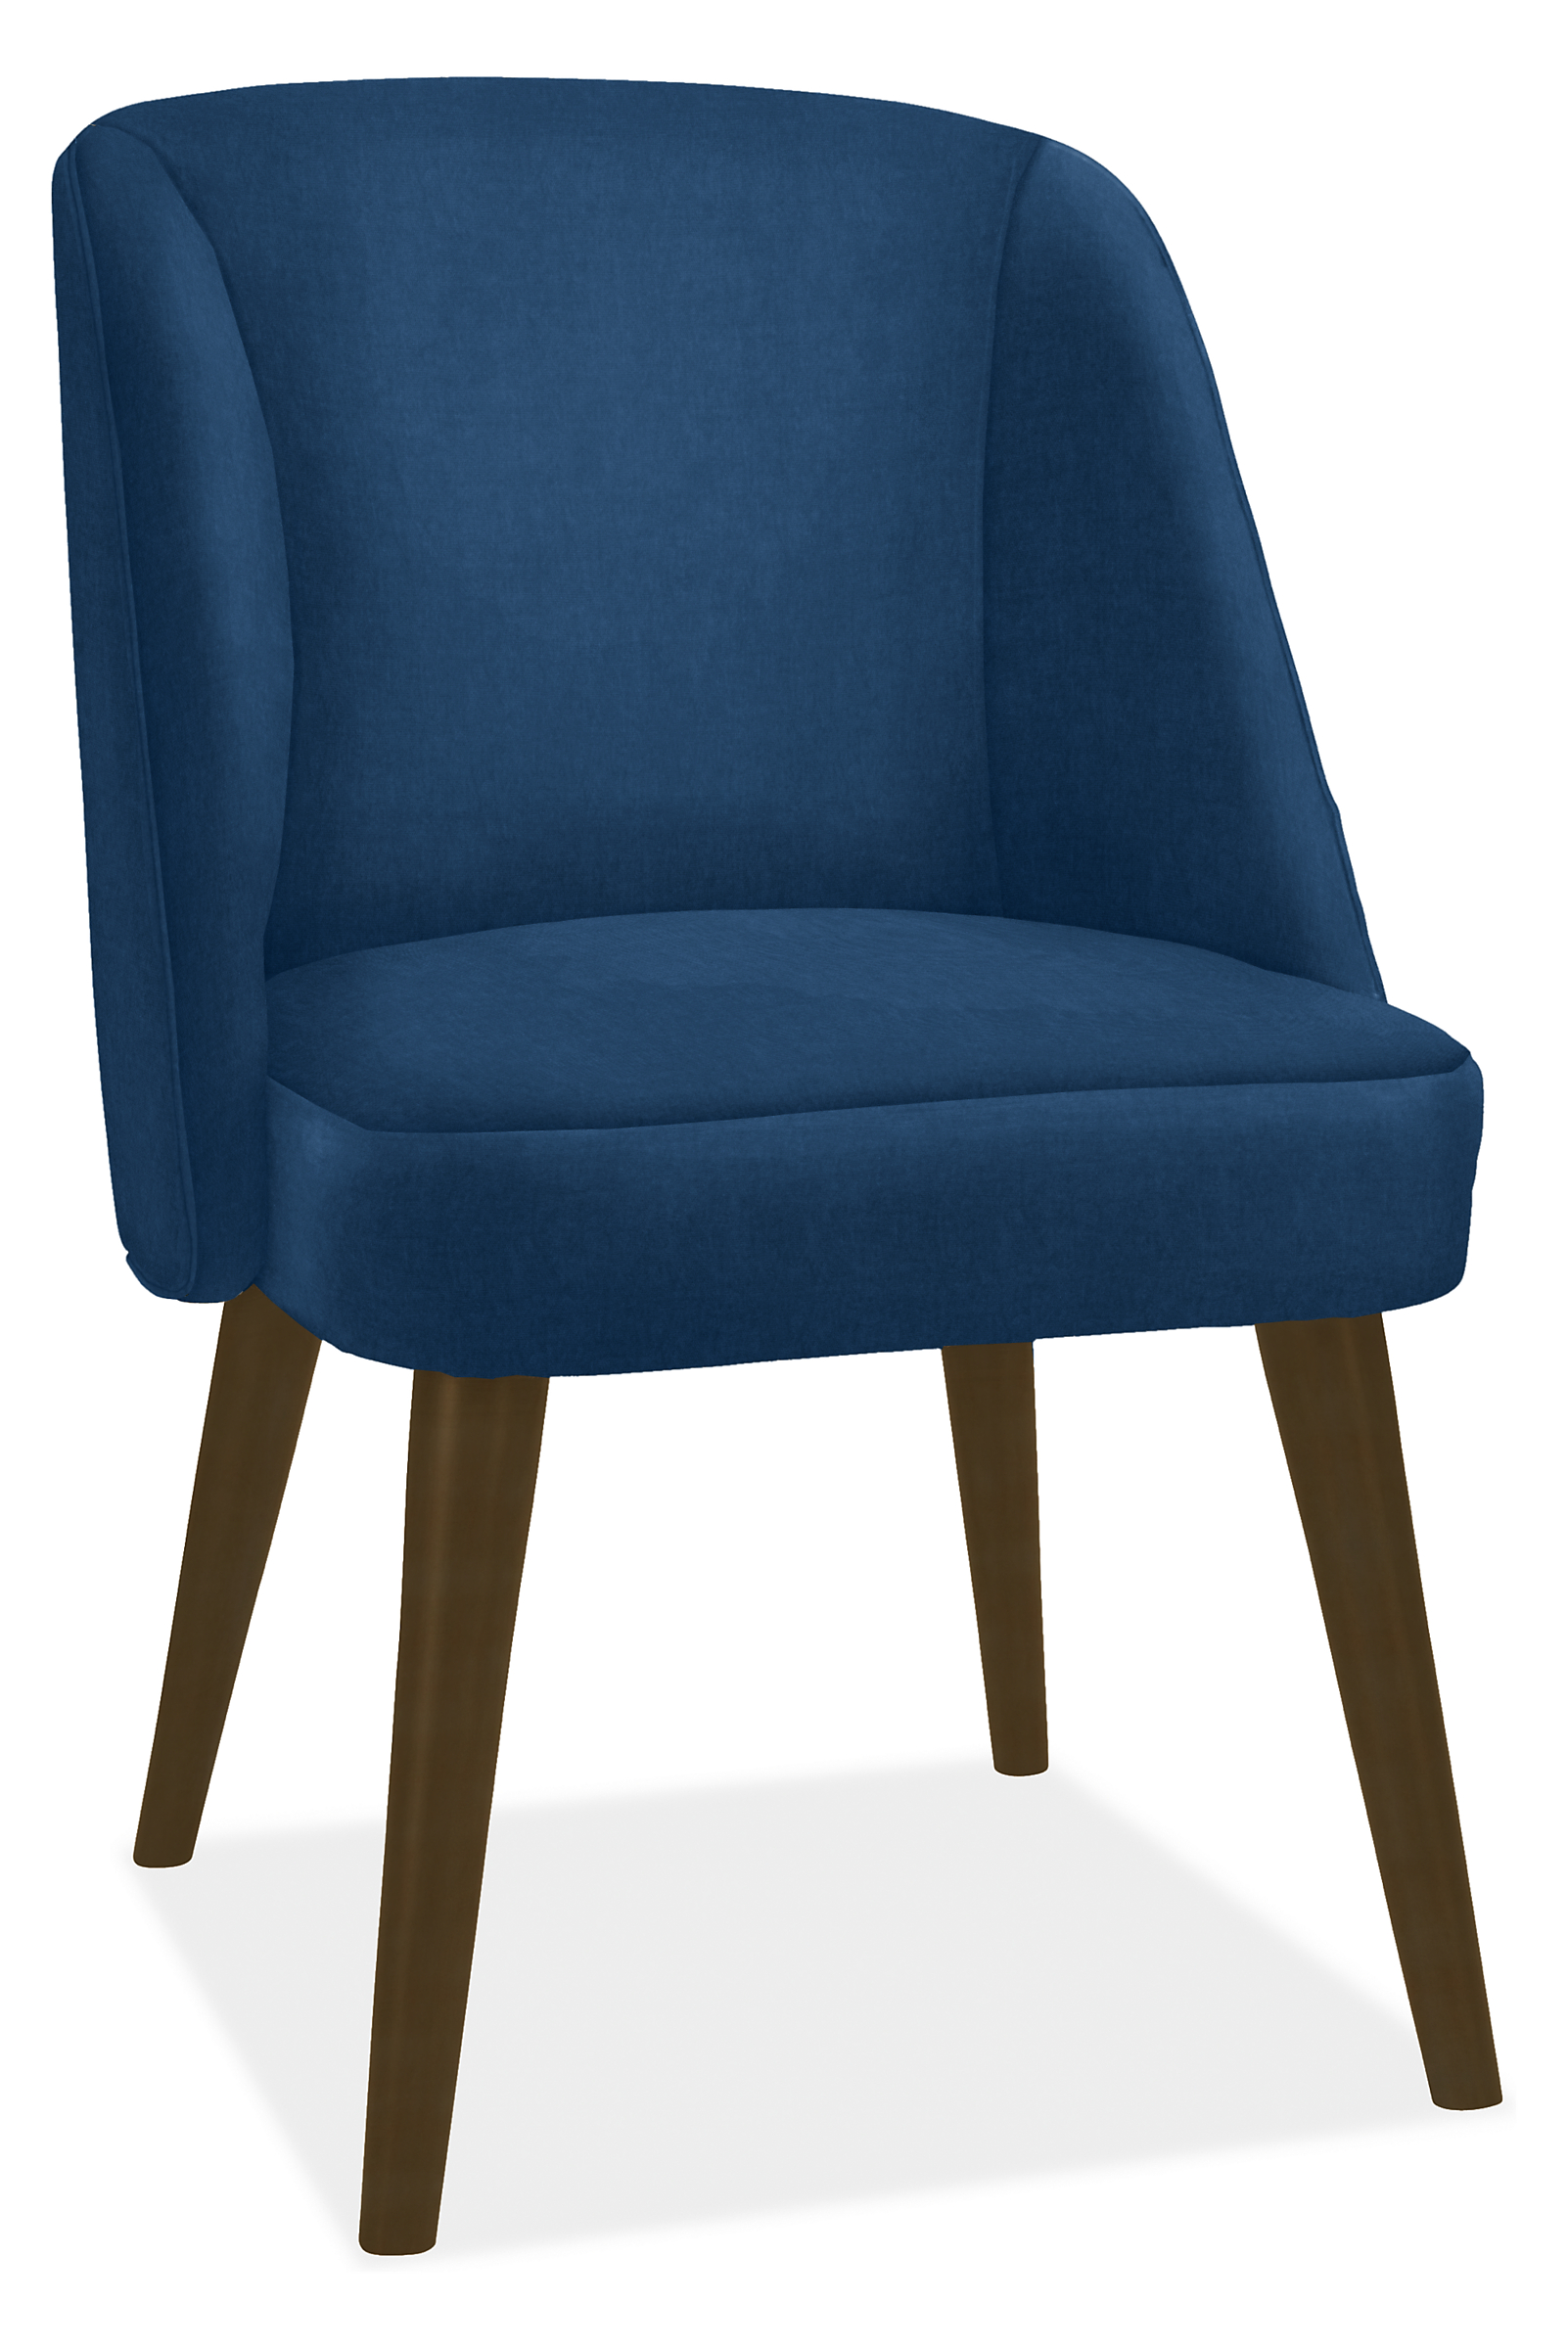 Cora Side Chair in Vance Indigo with Charcoal Legs